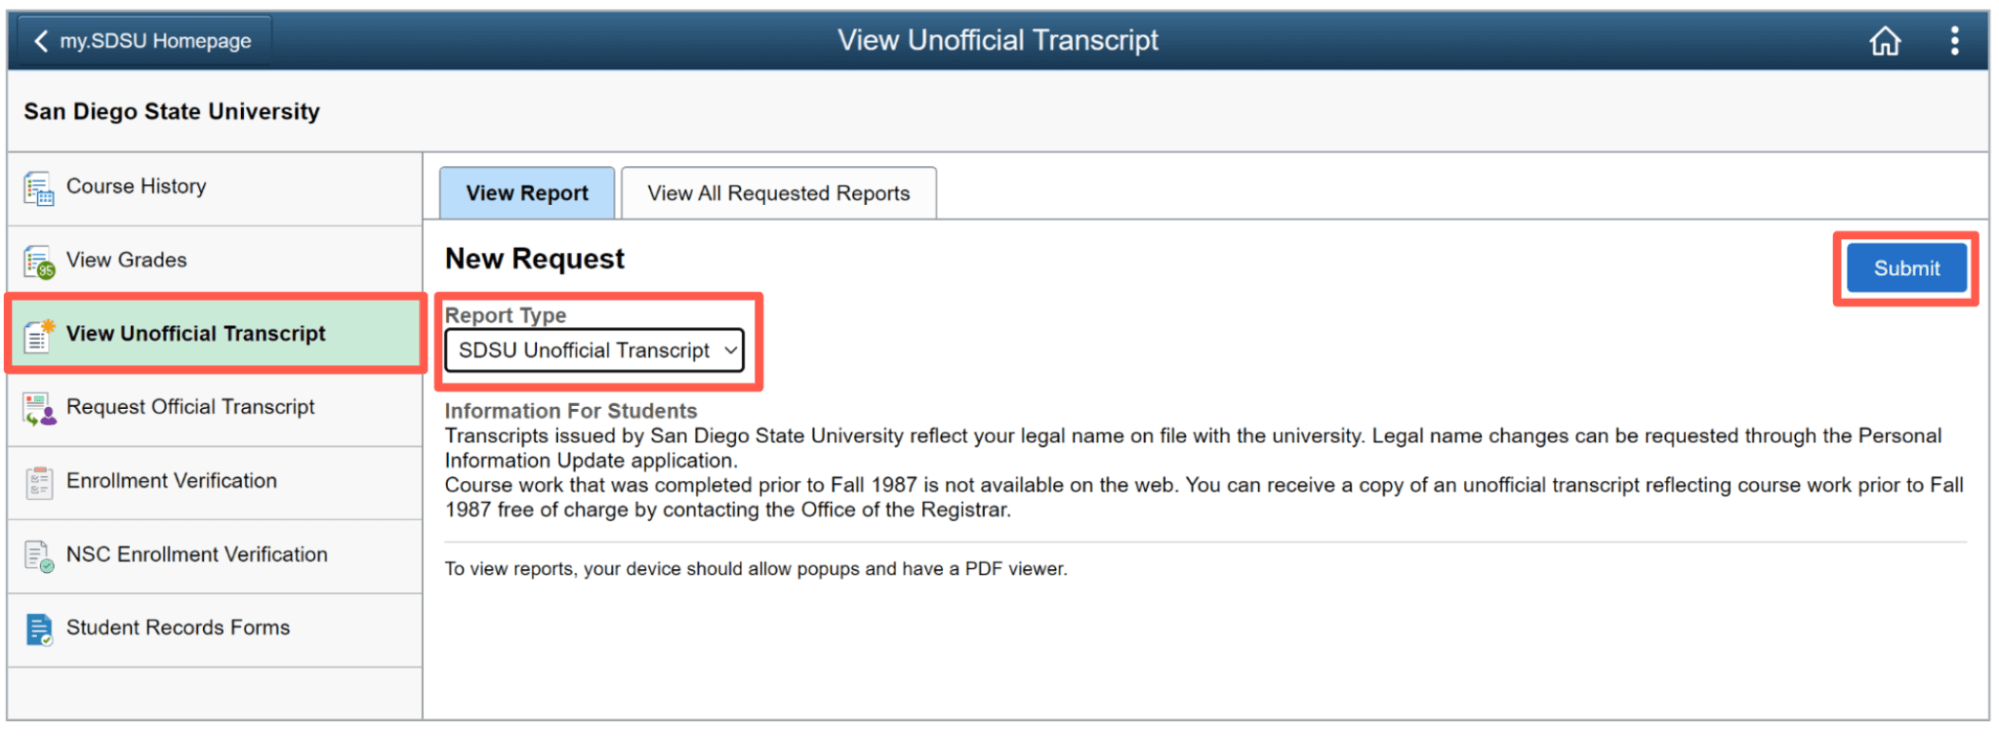 How do I View My Unofficial Transcript?